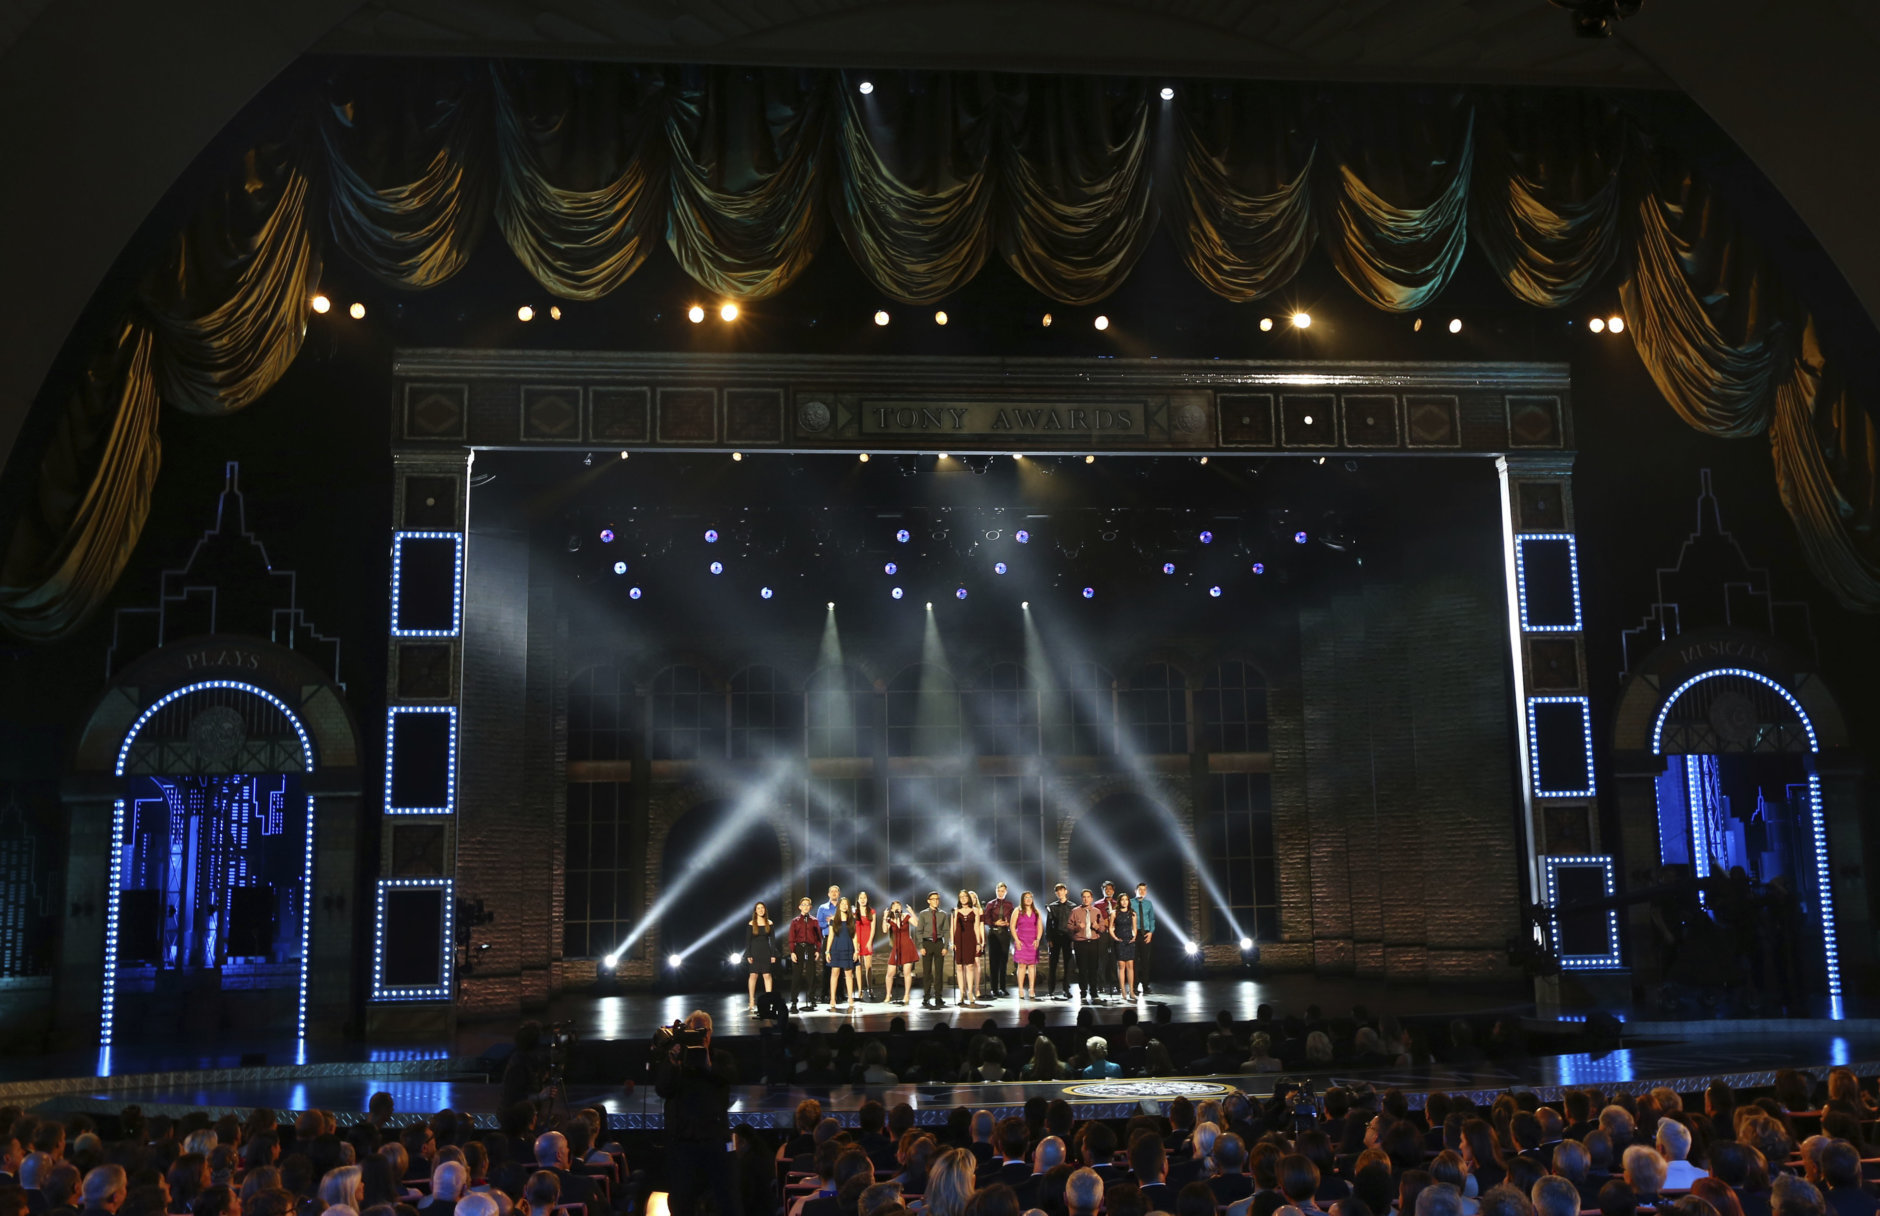 The Marjory Stoneman Douglas High School drama department perform "Seasons of Love" at the 72nd annual Tony Awards at Radio City Music Hall on Sunday, June 10, 2018, in New York. (Photo by Michael Zorn/Invision/AP)